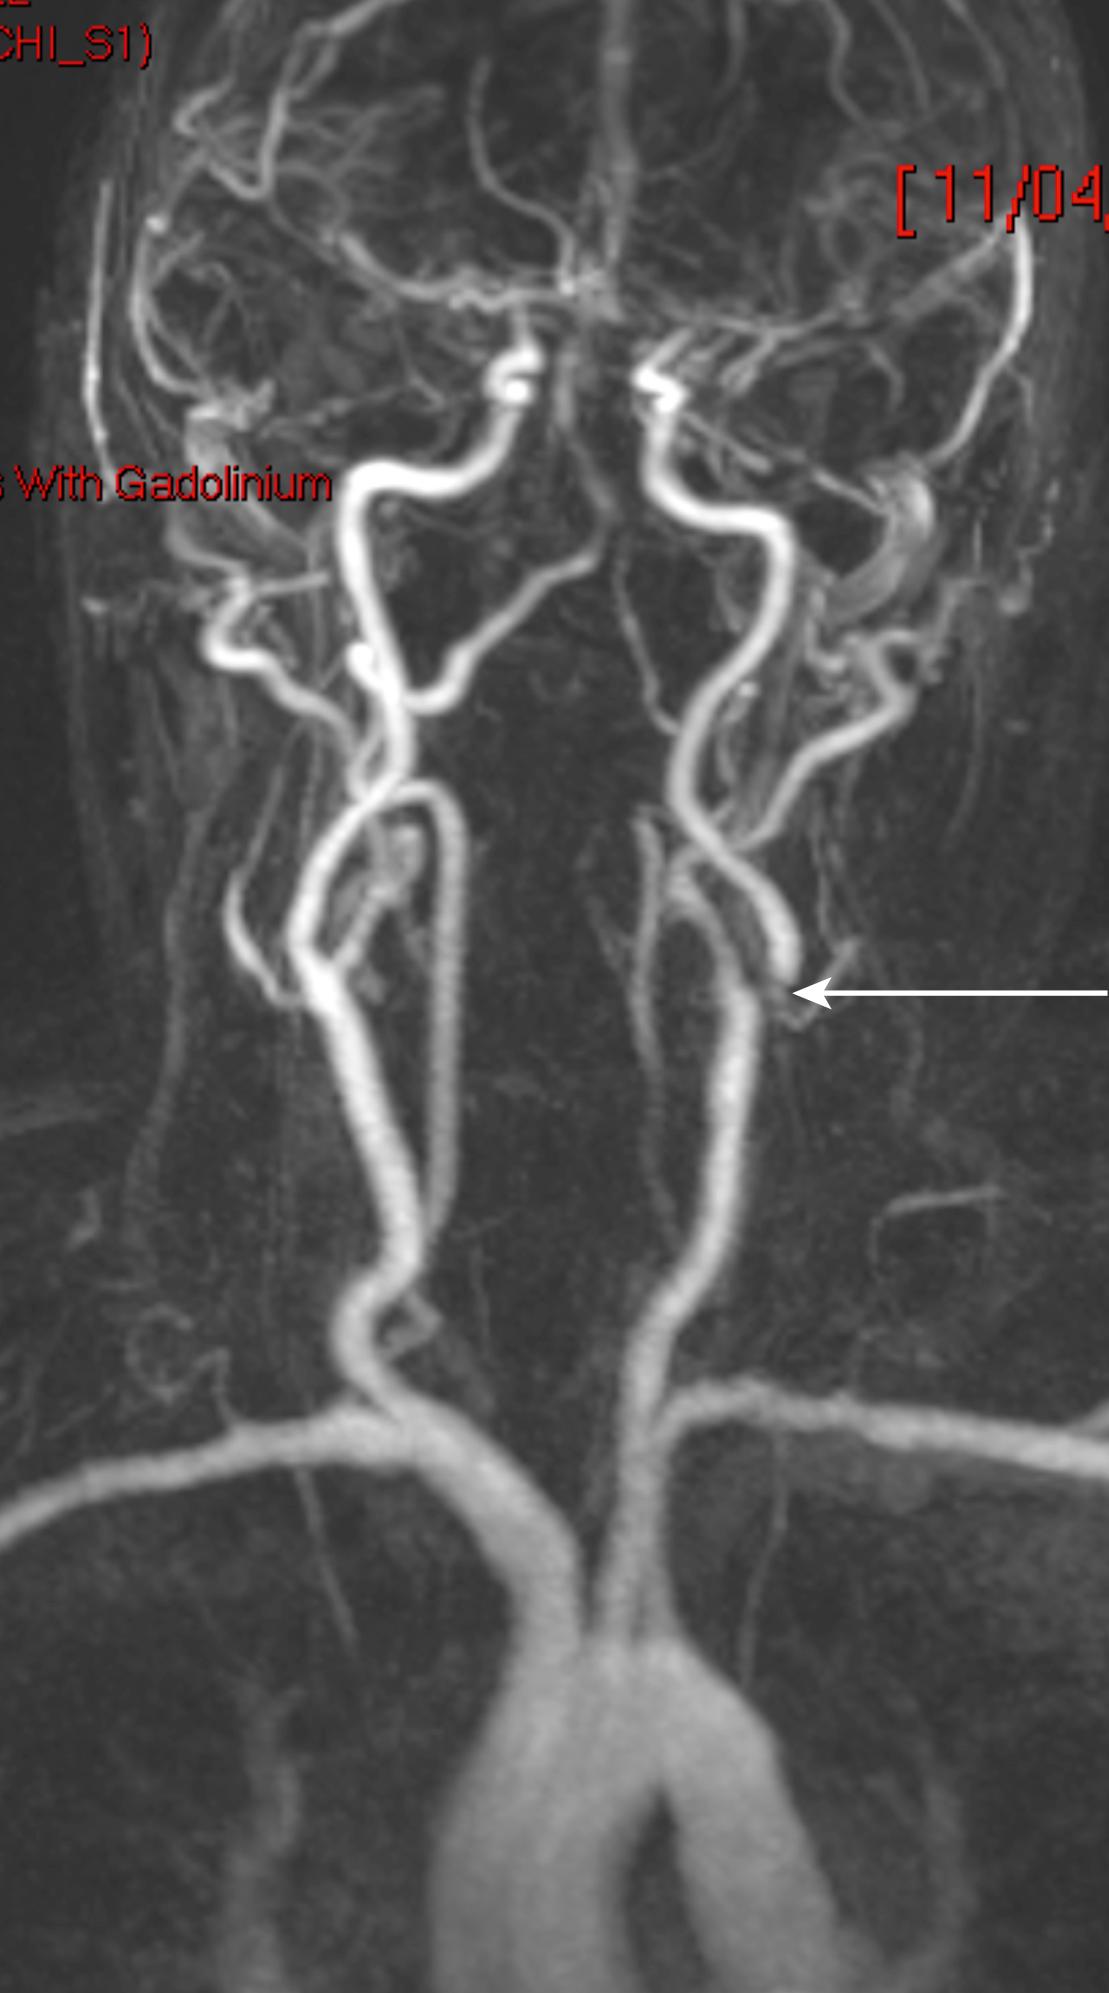 Fig. 22.16, Carotid magnetic resonance angiogram (MRA). The arterial blood to the brain from the origins of the great vessels from the aortic arch to the circle of Willis and cerebral arteries within the skull. The image confirms that there is a tight stenosis at the origin of the left internal carotid artery ( arrow ).